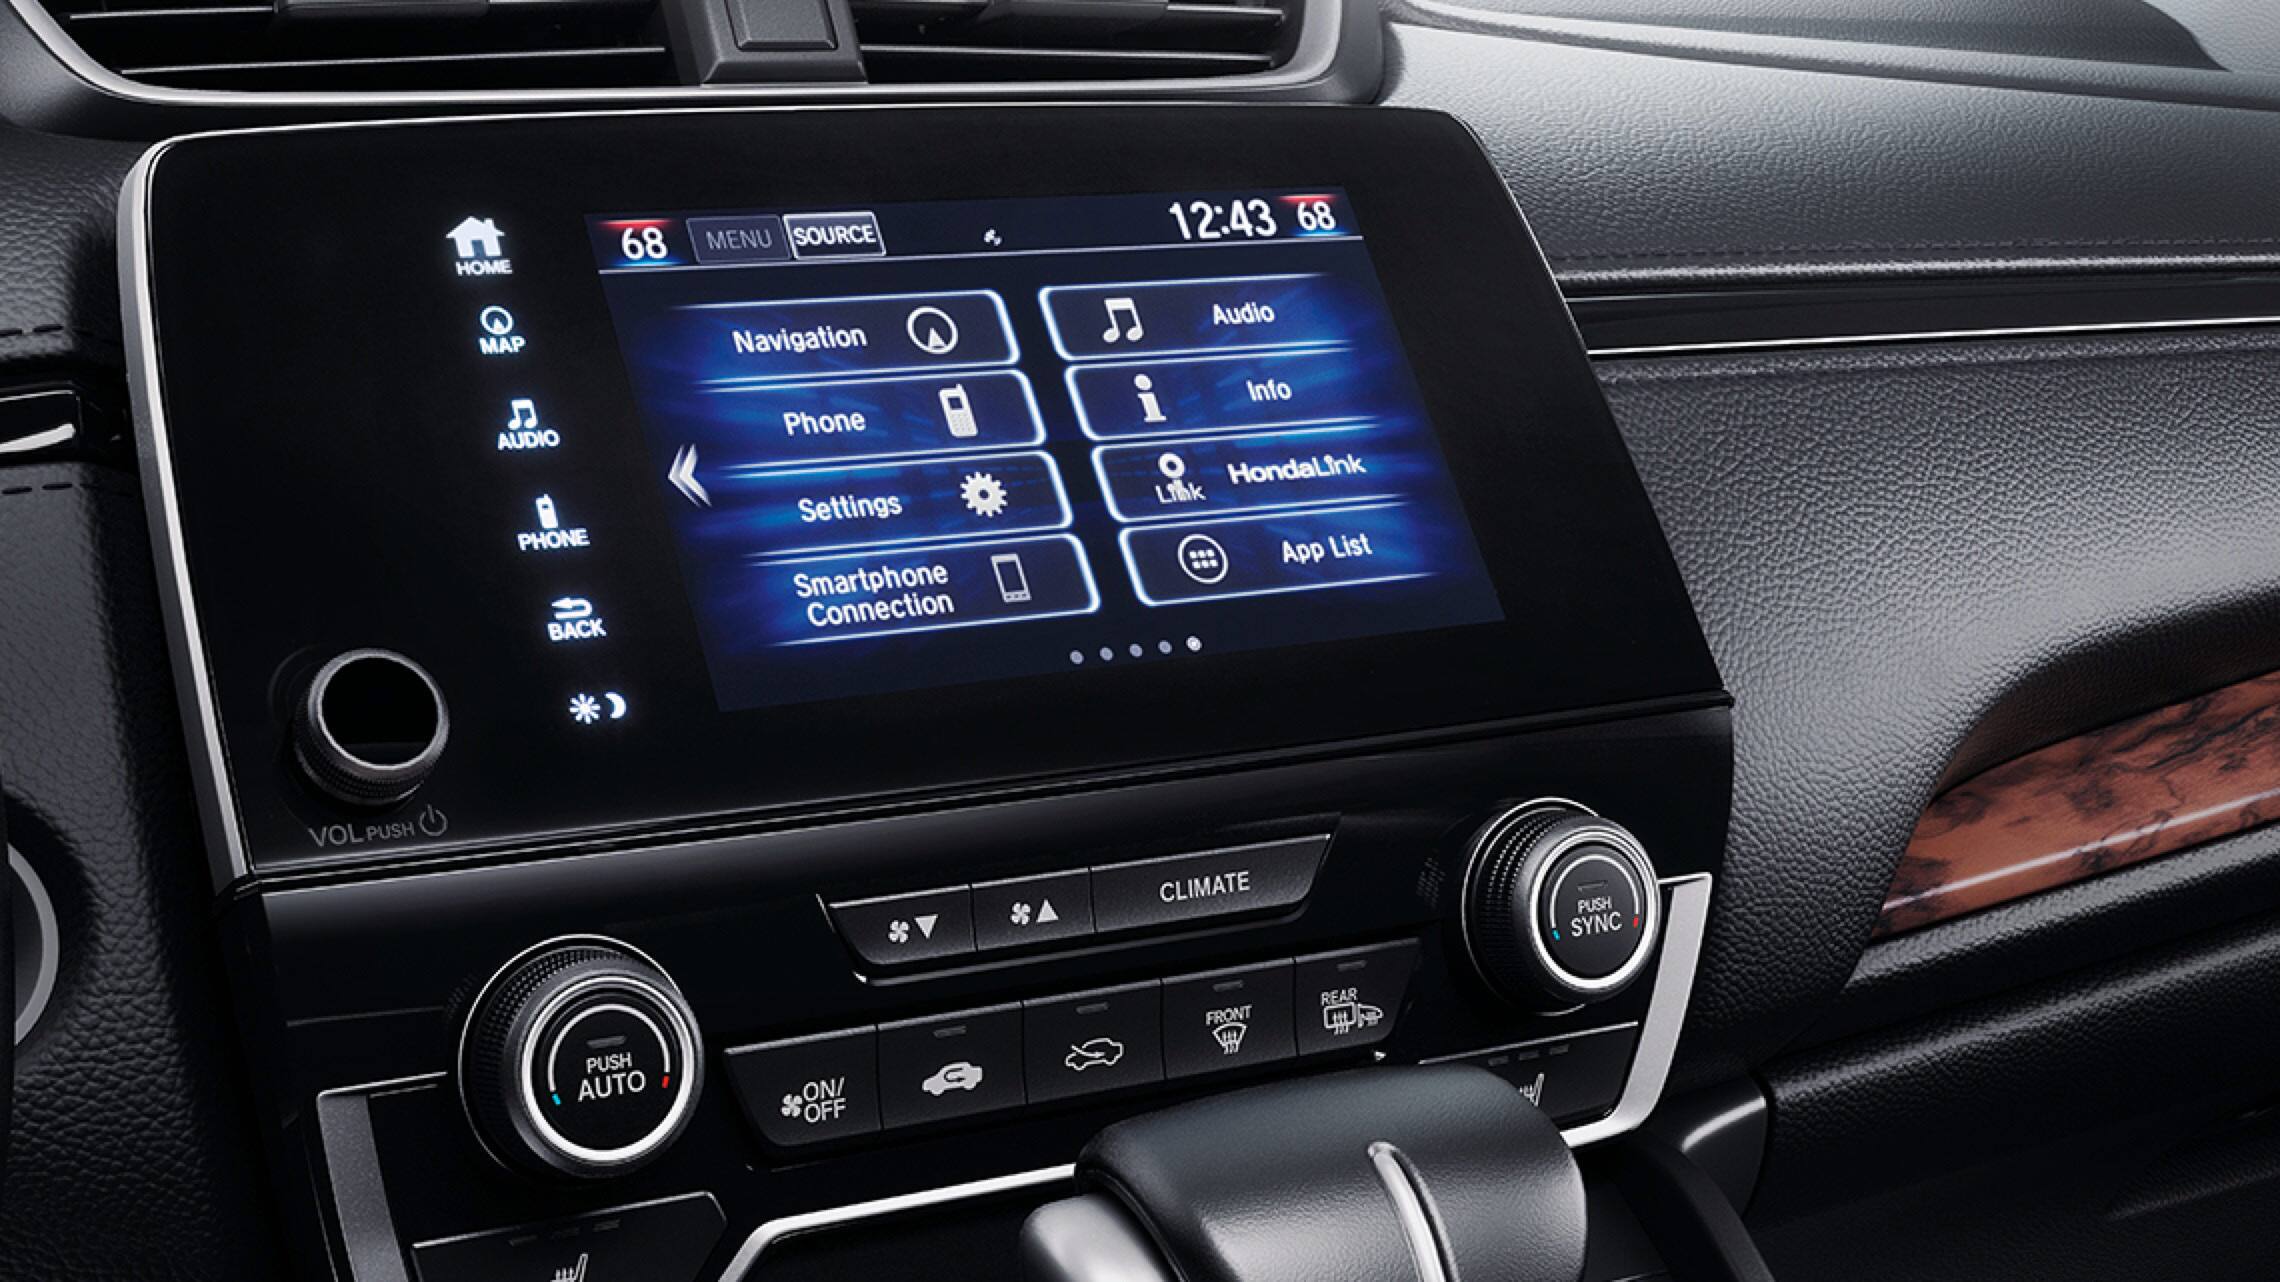 7-inch Display Audio touch-screen in the 2019 Honda CR-V.